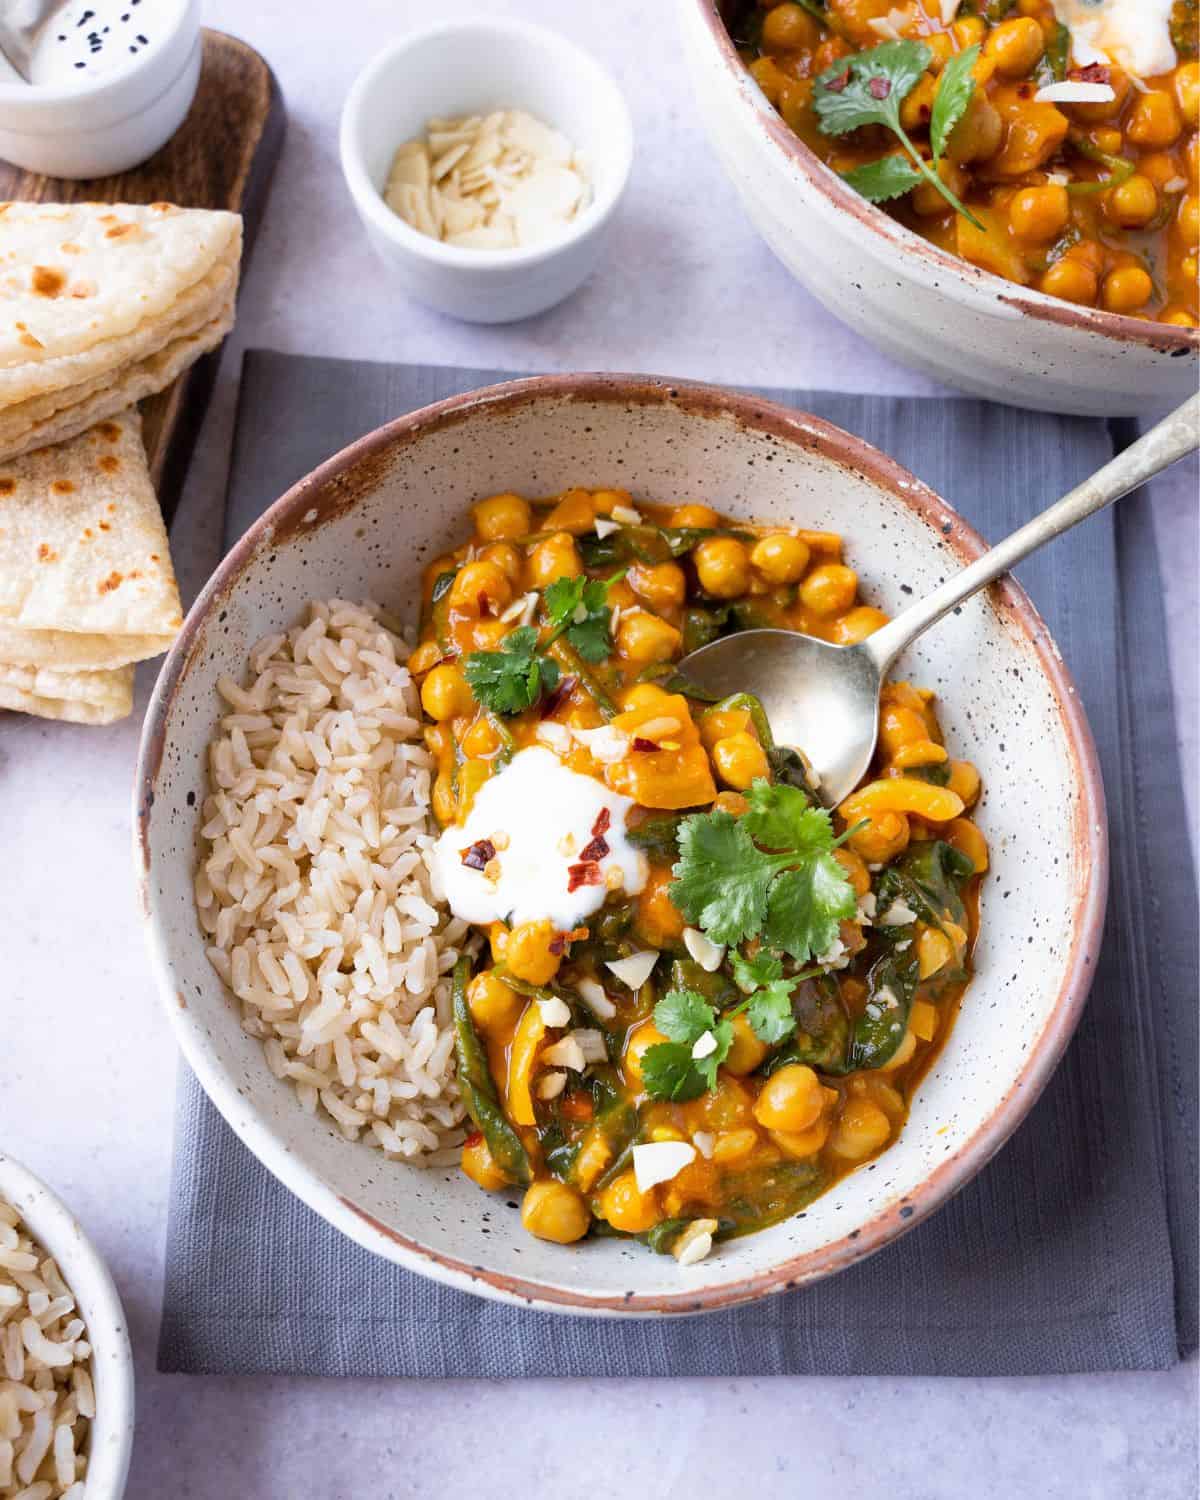 Chickpea and spinach curry with rice and a spoon.